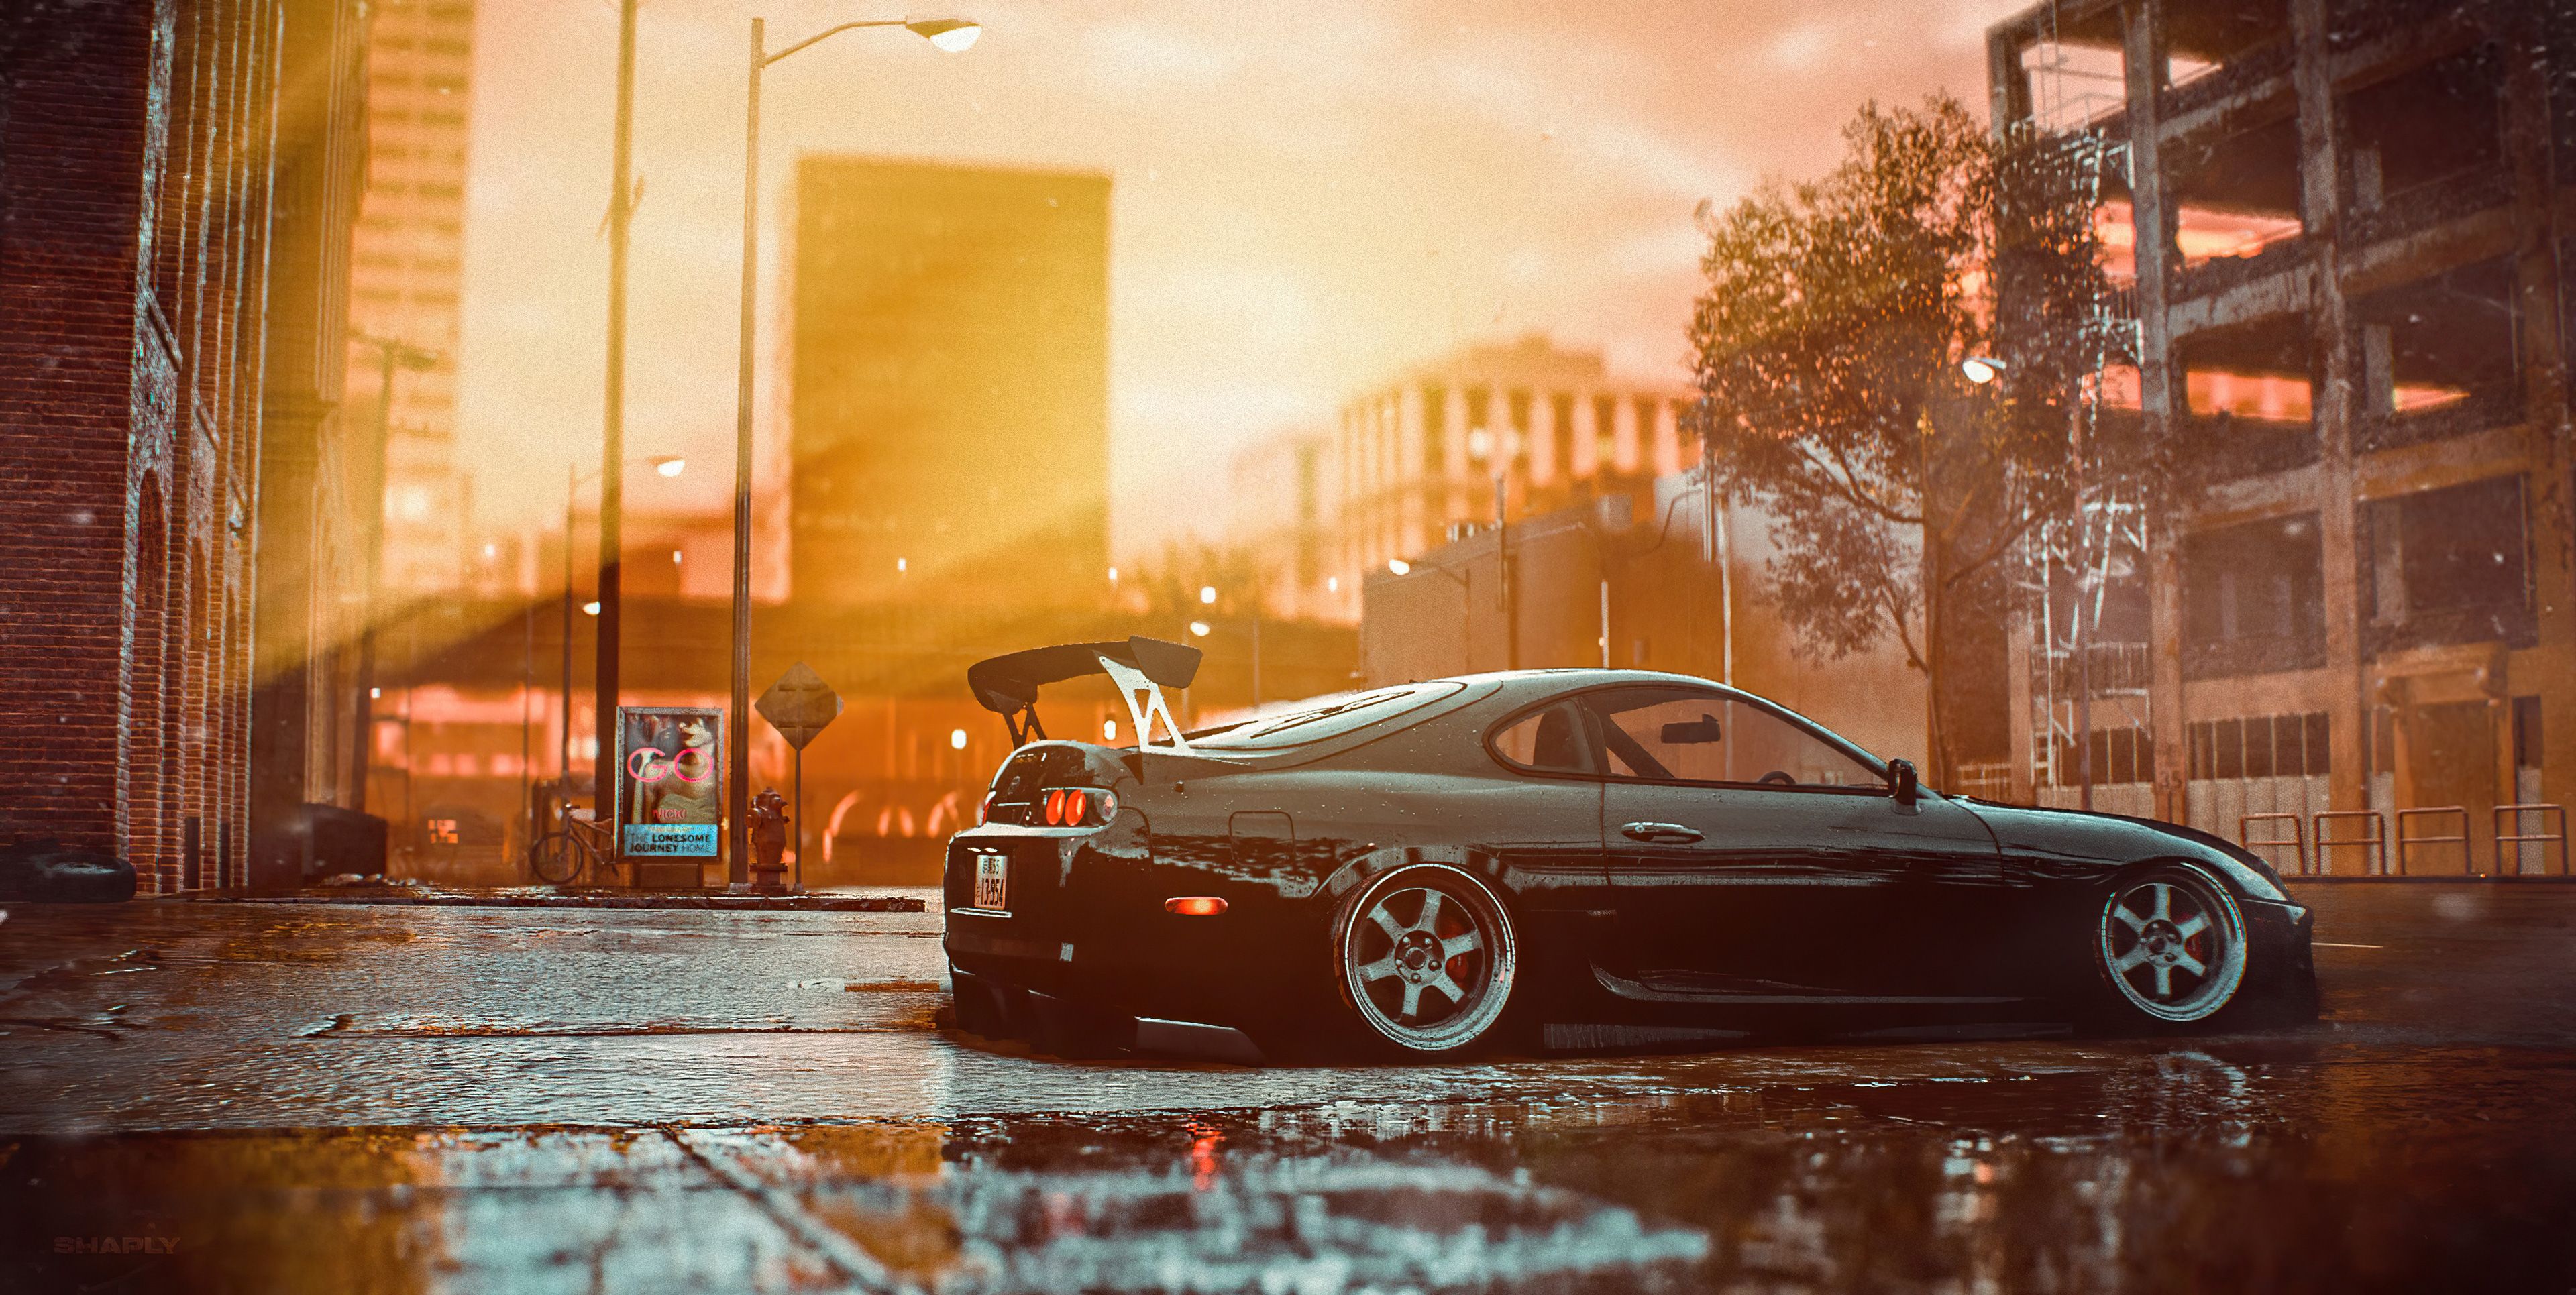 Toyota supra need for speed game k toyota supra need for speed game k wallpapers need for speed games need for speed toyota supra